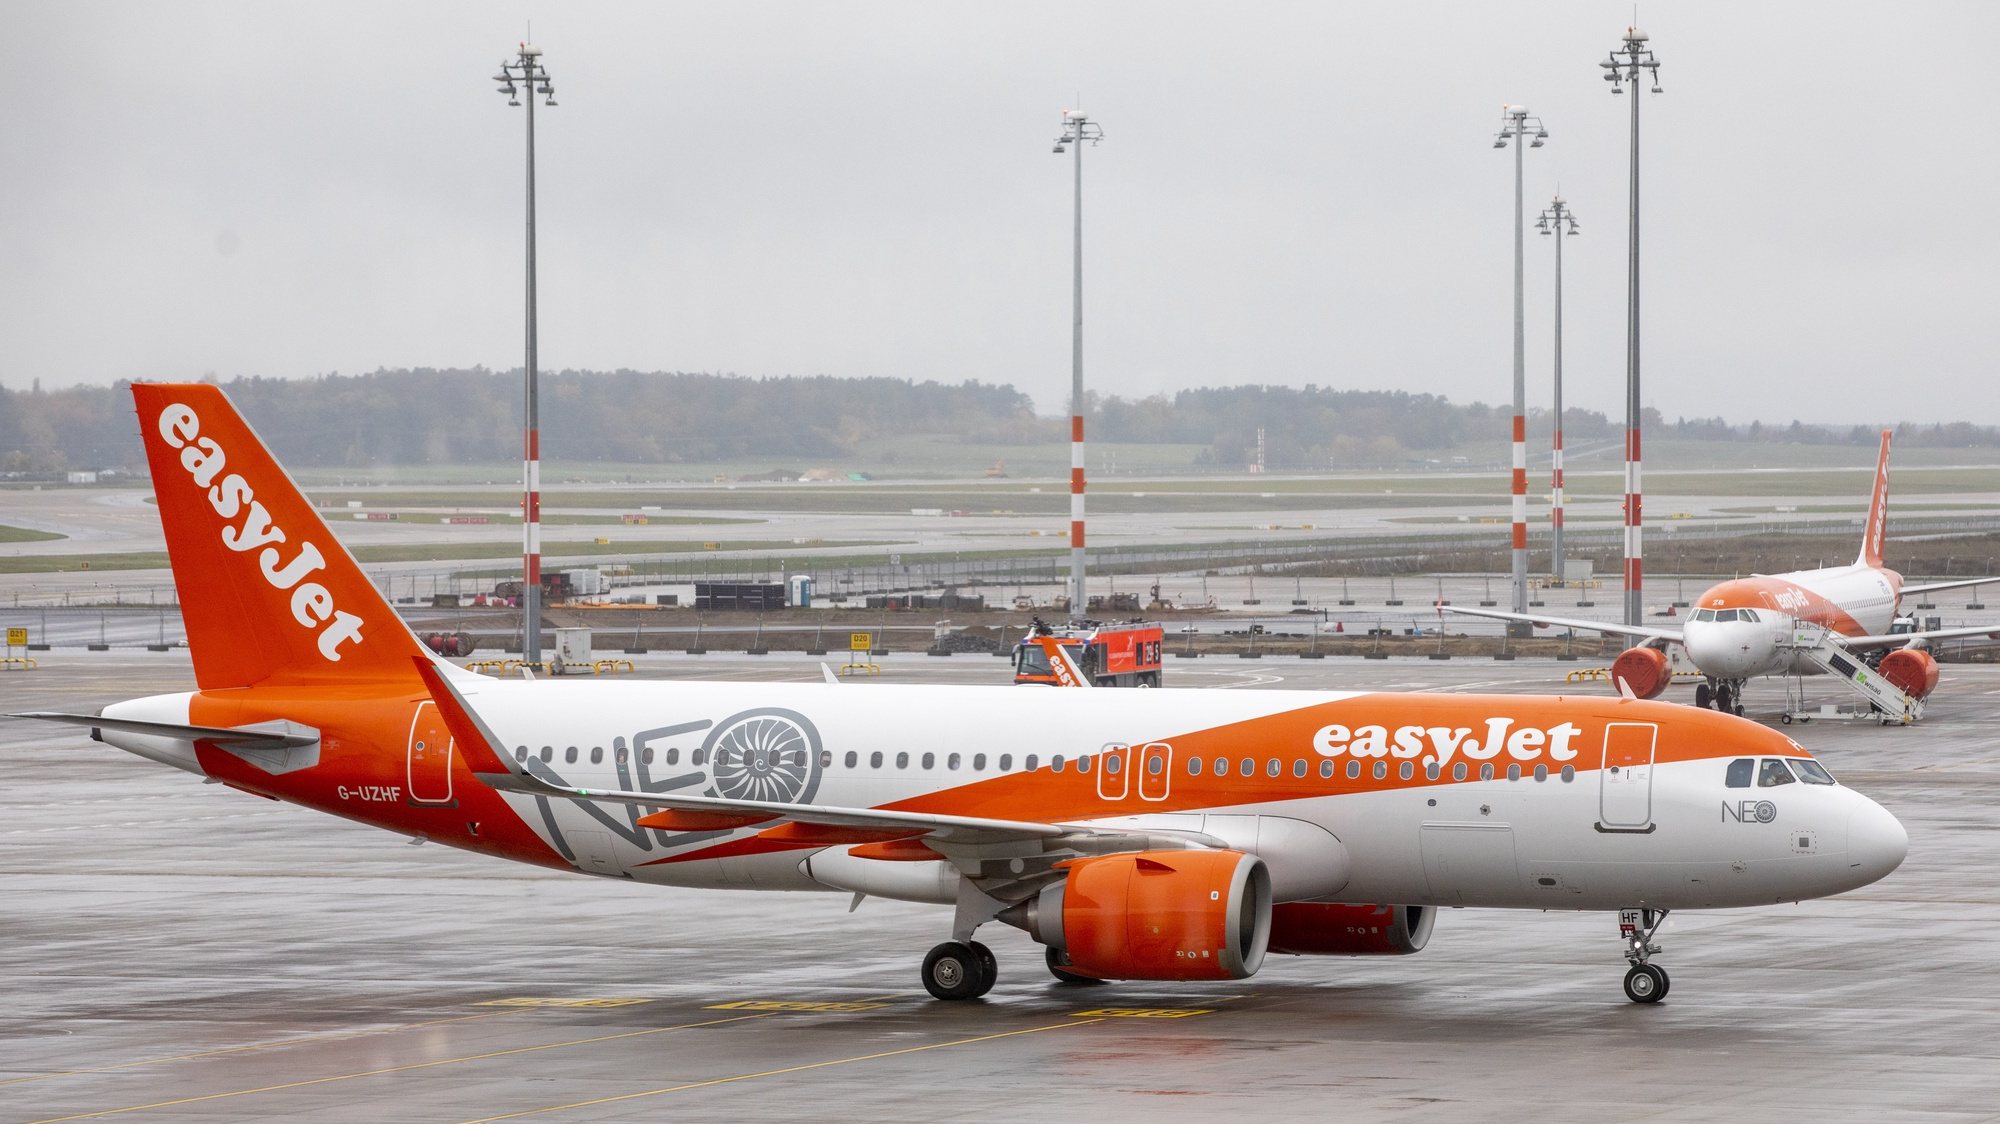 epa08788741 Aircraft of airline Easyjet arrives at Berlin&#039;s airport &quot;Berlin Brandenburg Airport Willy Brandt&quot;, during the opening on the first day of operation for the new BER Berlin Brandenburg Airport on October 31, 2020 in Schoenefeld, Germany. The new airport incorporates former Schoenefeld airport as its Terminal 5 and also replaces Tegel Airport, which will close in coming days. Berlin Brandenburg Airport was originally scheduled to open in 2011 but was stricken by design flaws, corruption scandals, legal wranglings and failed technical audits. The airport will serve Berlin and the surrounding region.  EPA/Maja Hitij / POOL